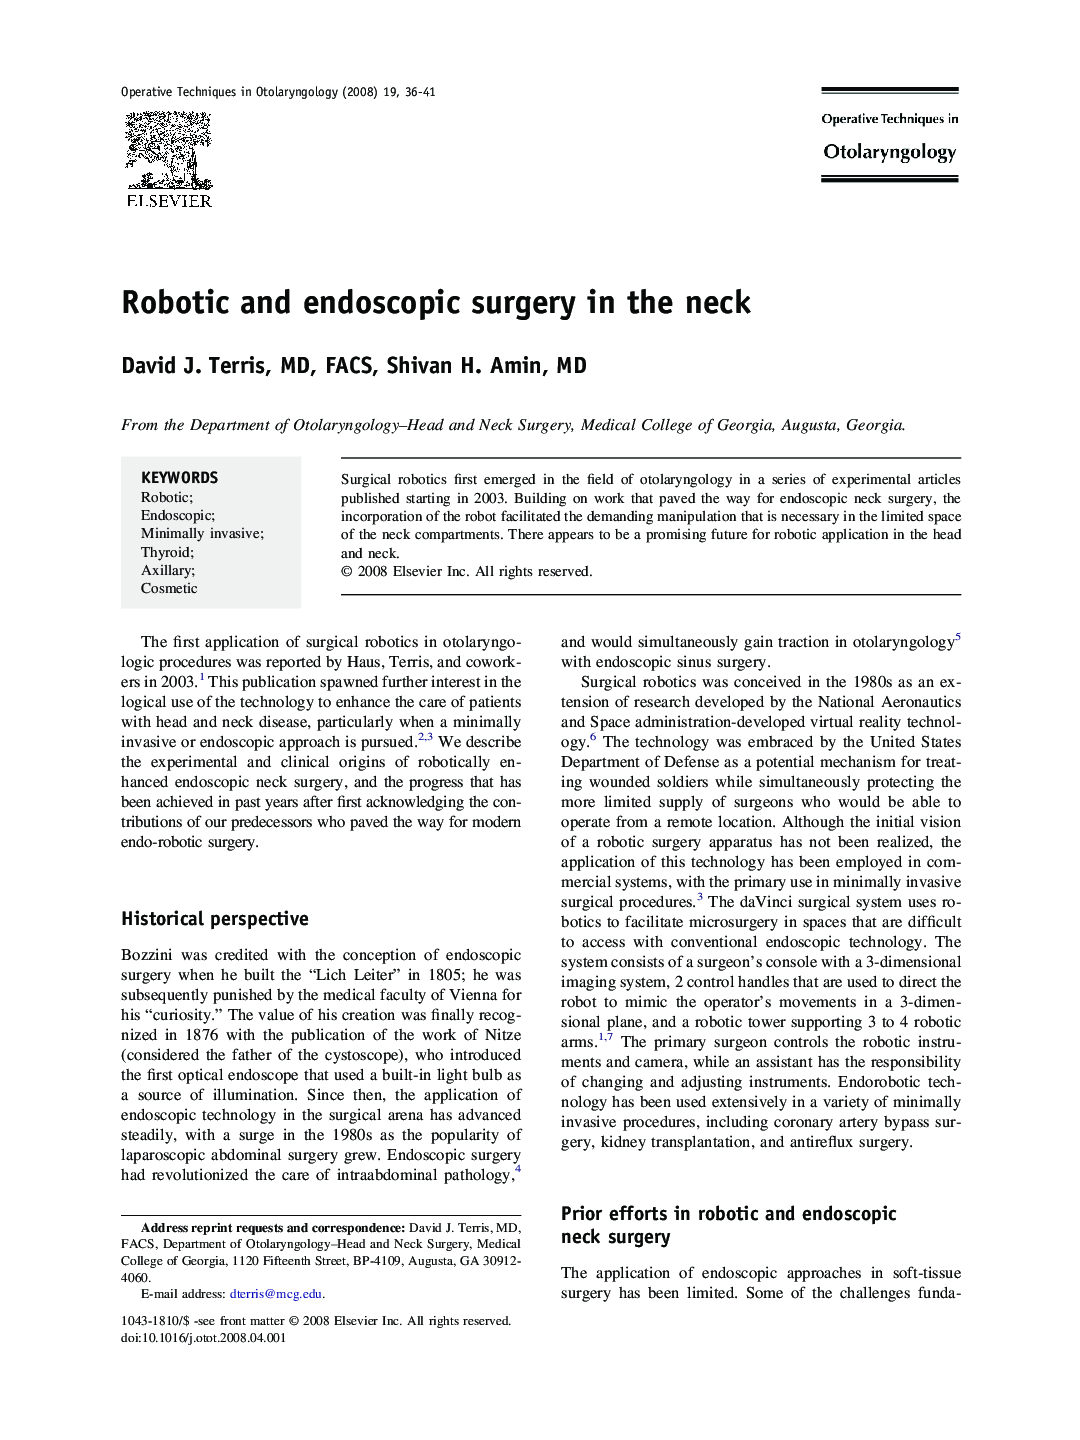 Robotic and endoscopic surgery in the neck